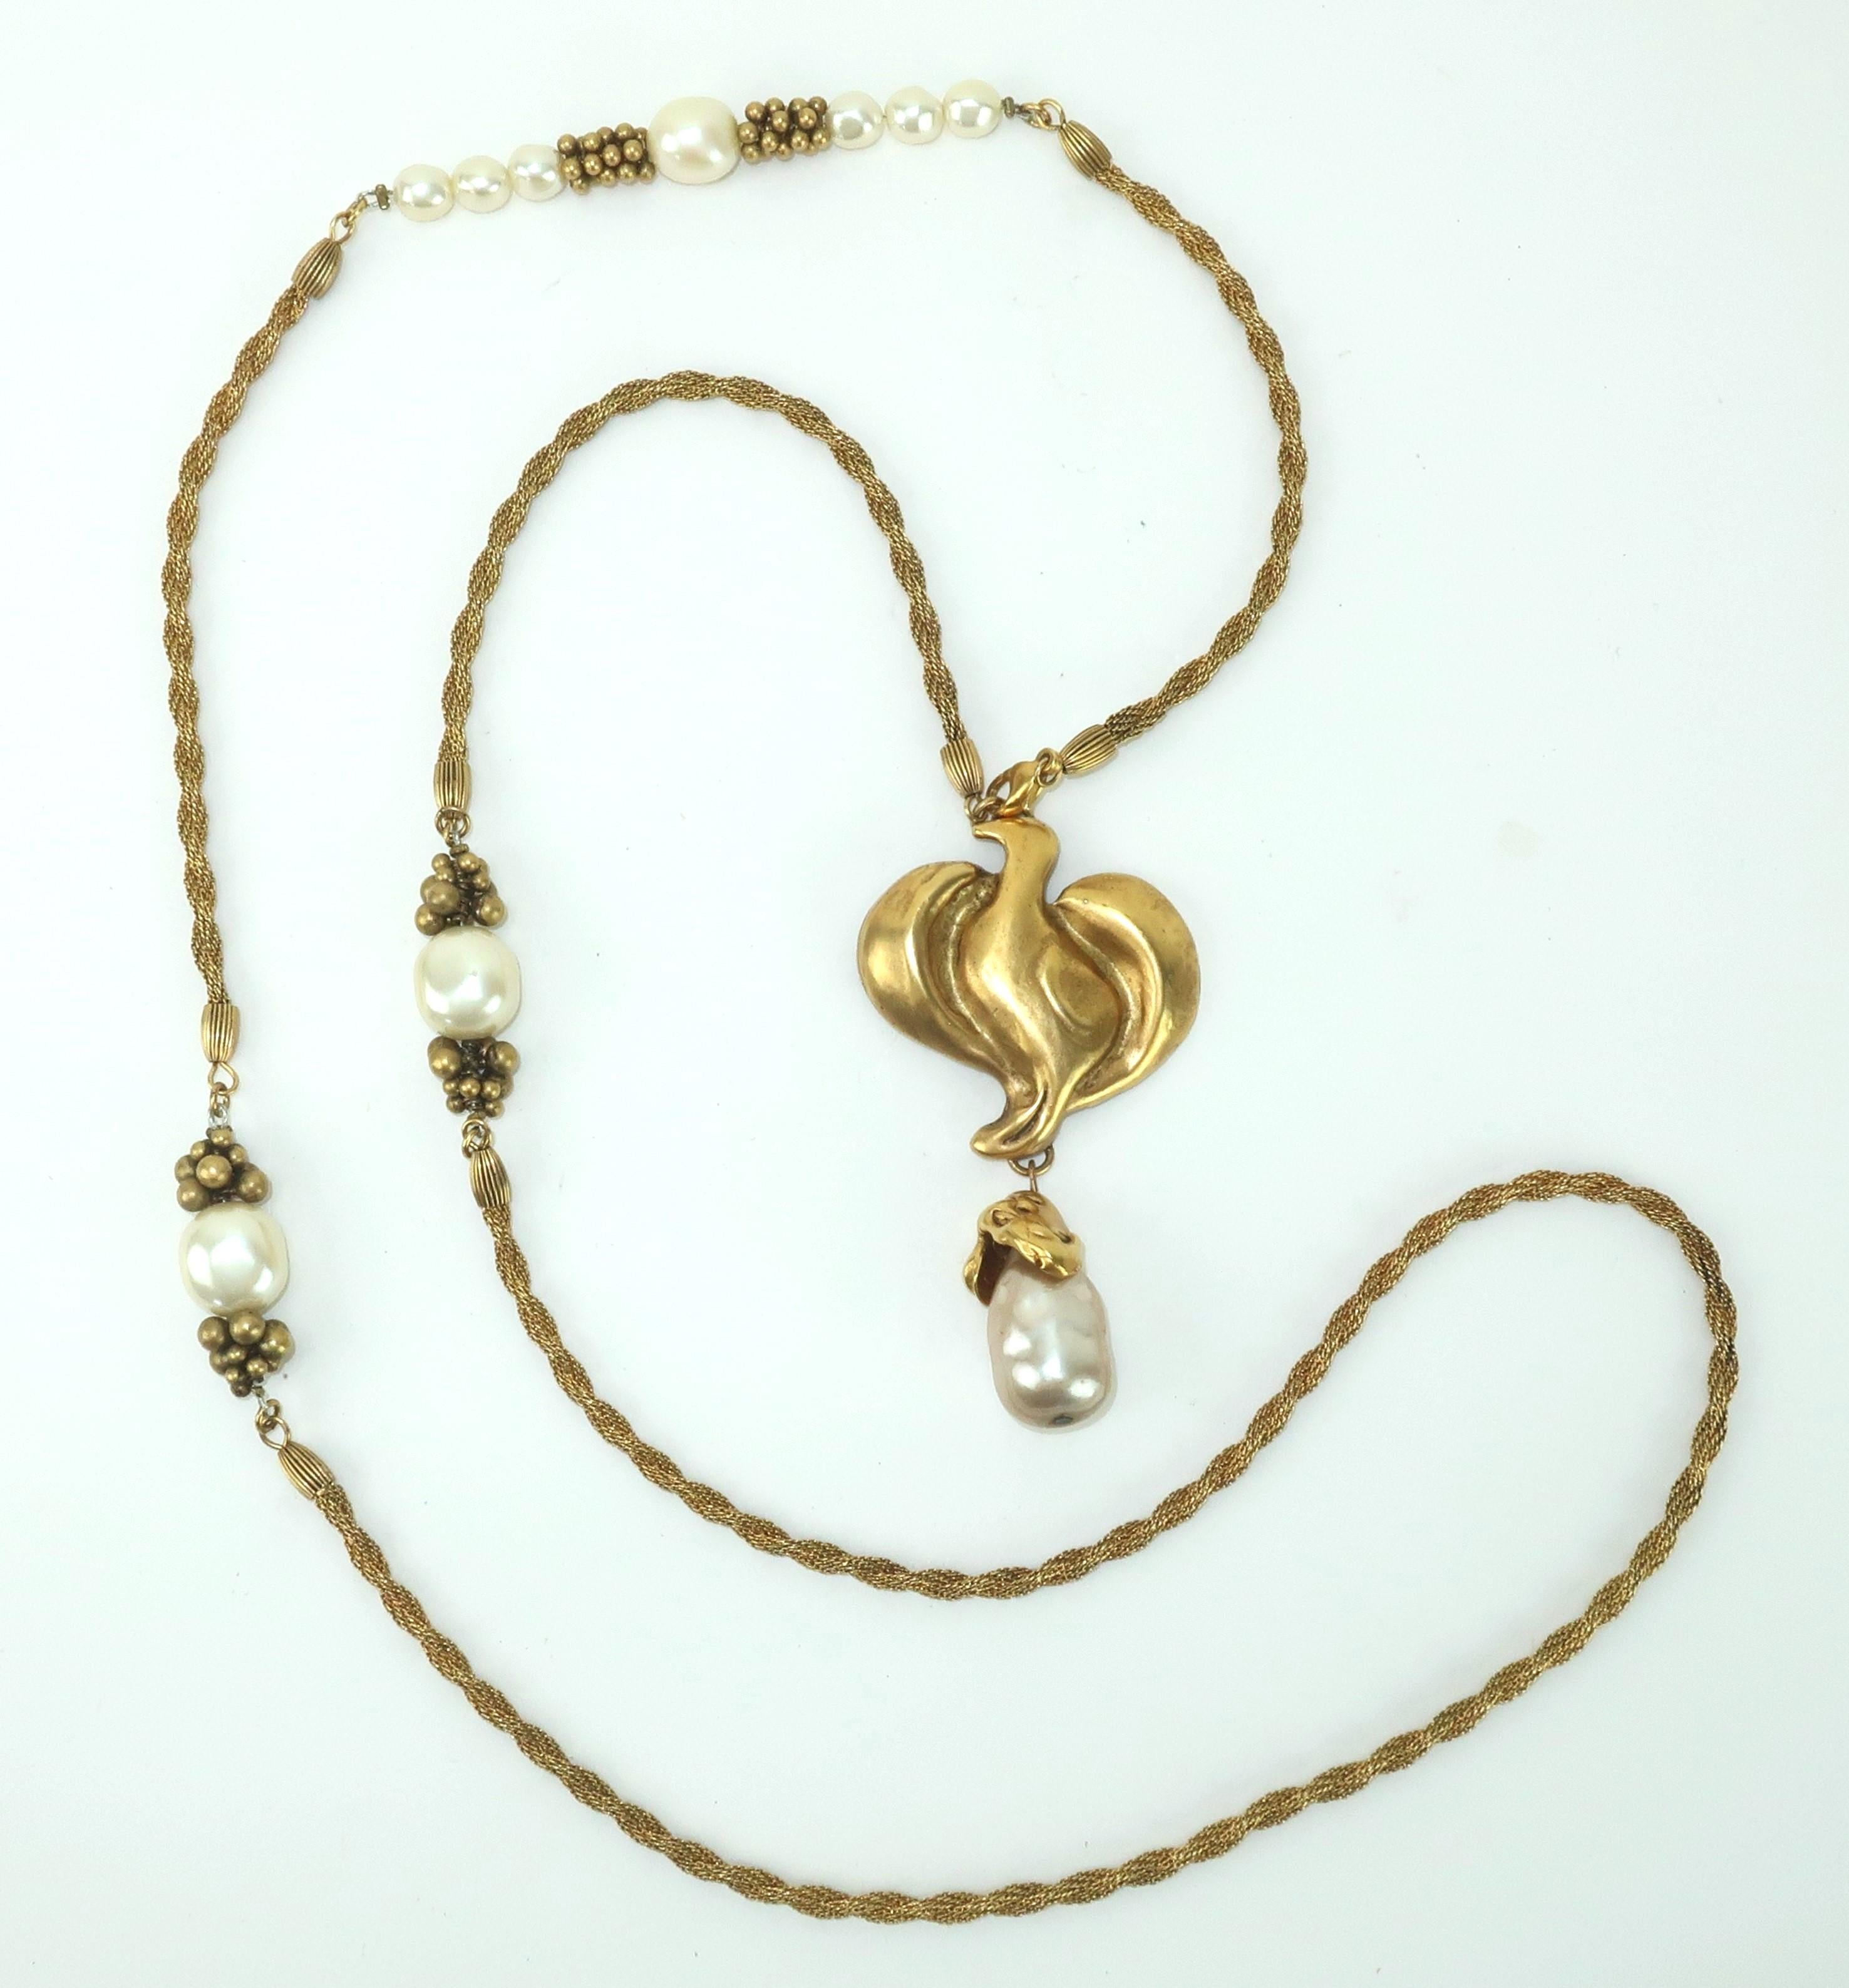 Late 20th Century opera length gold tone rope necklace with an abstract bird pendant and faux baroque pearl accents.  The necklace is beautifully made with quality details including the cluster beading around the pearls and fluted fittings